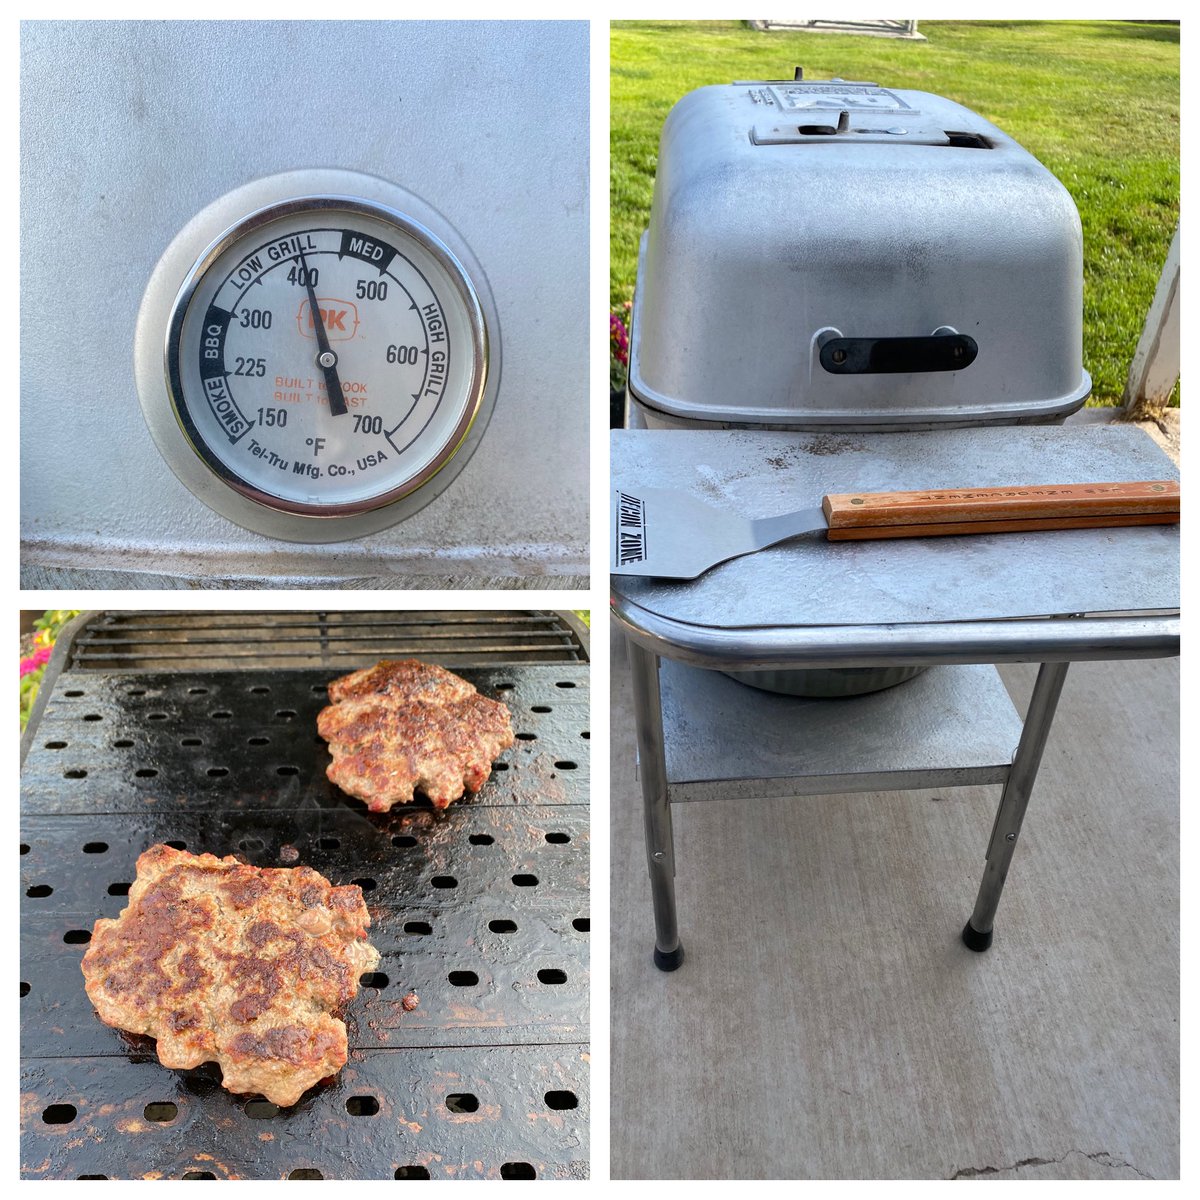 #stayincookout @pkgrills @GrillGrate  @Kingsford #notforcompany